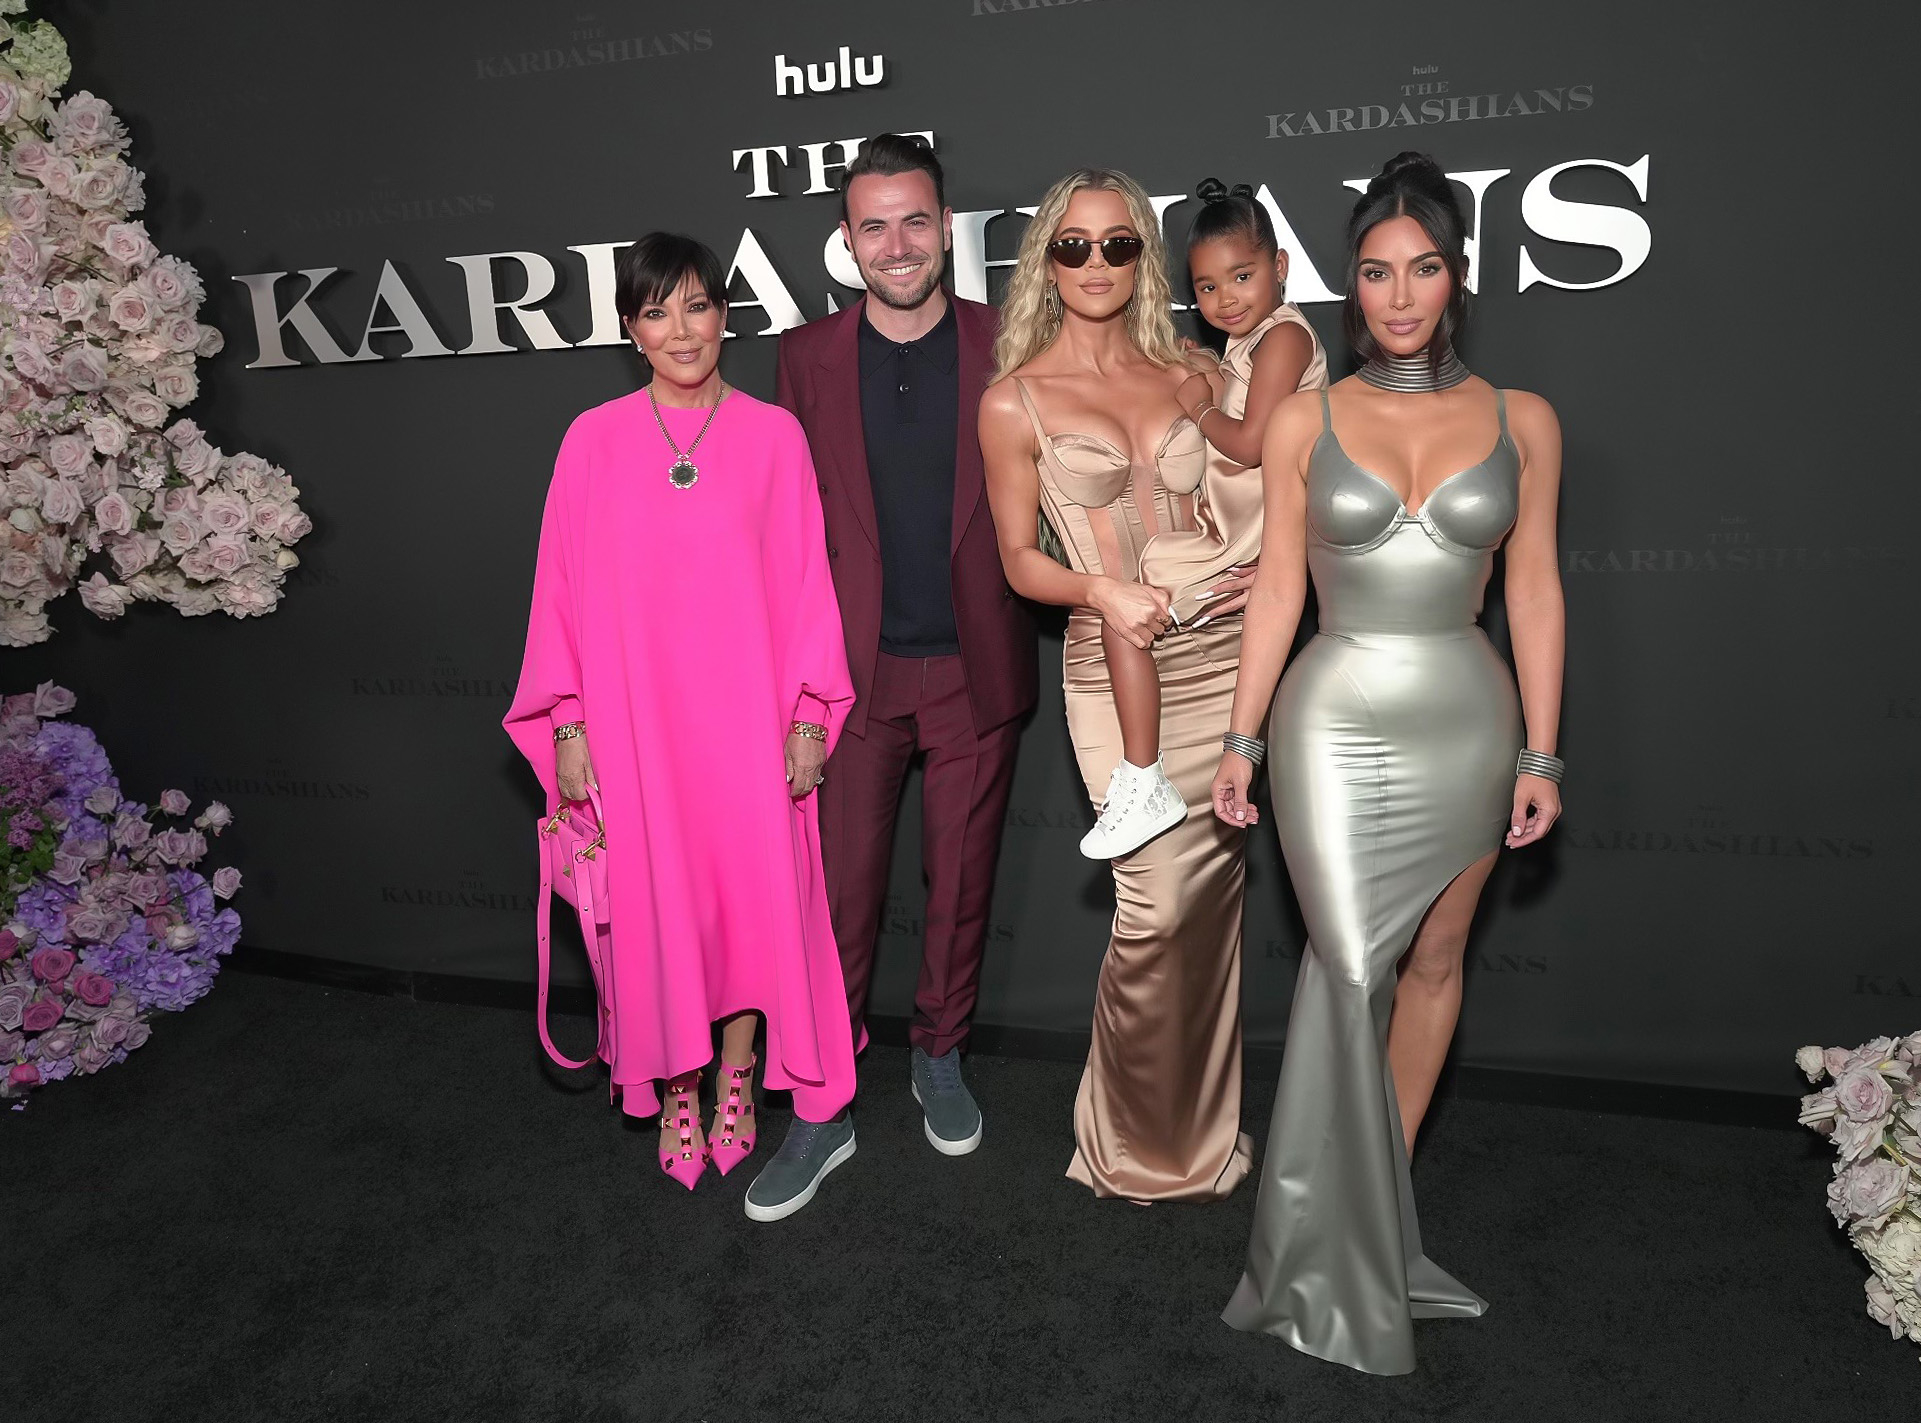 ben with kris, kim and khloe at the show premiere